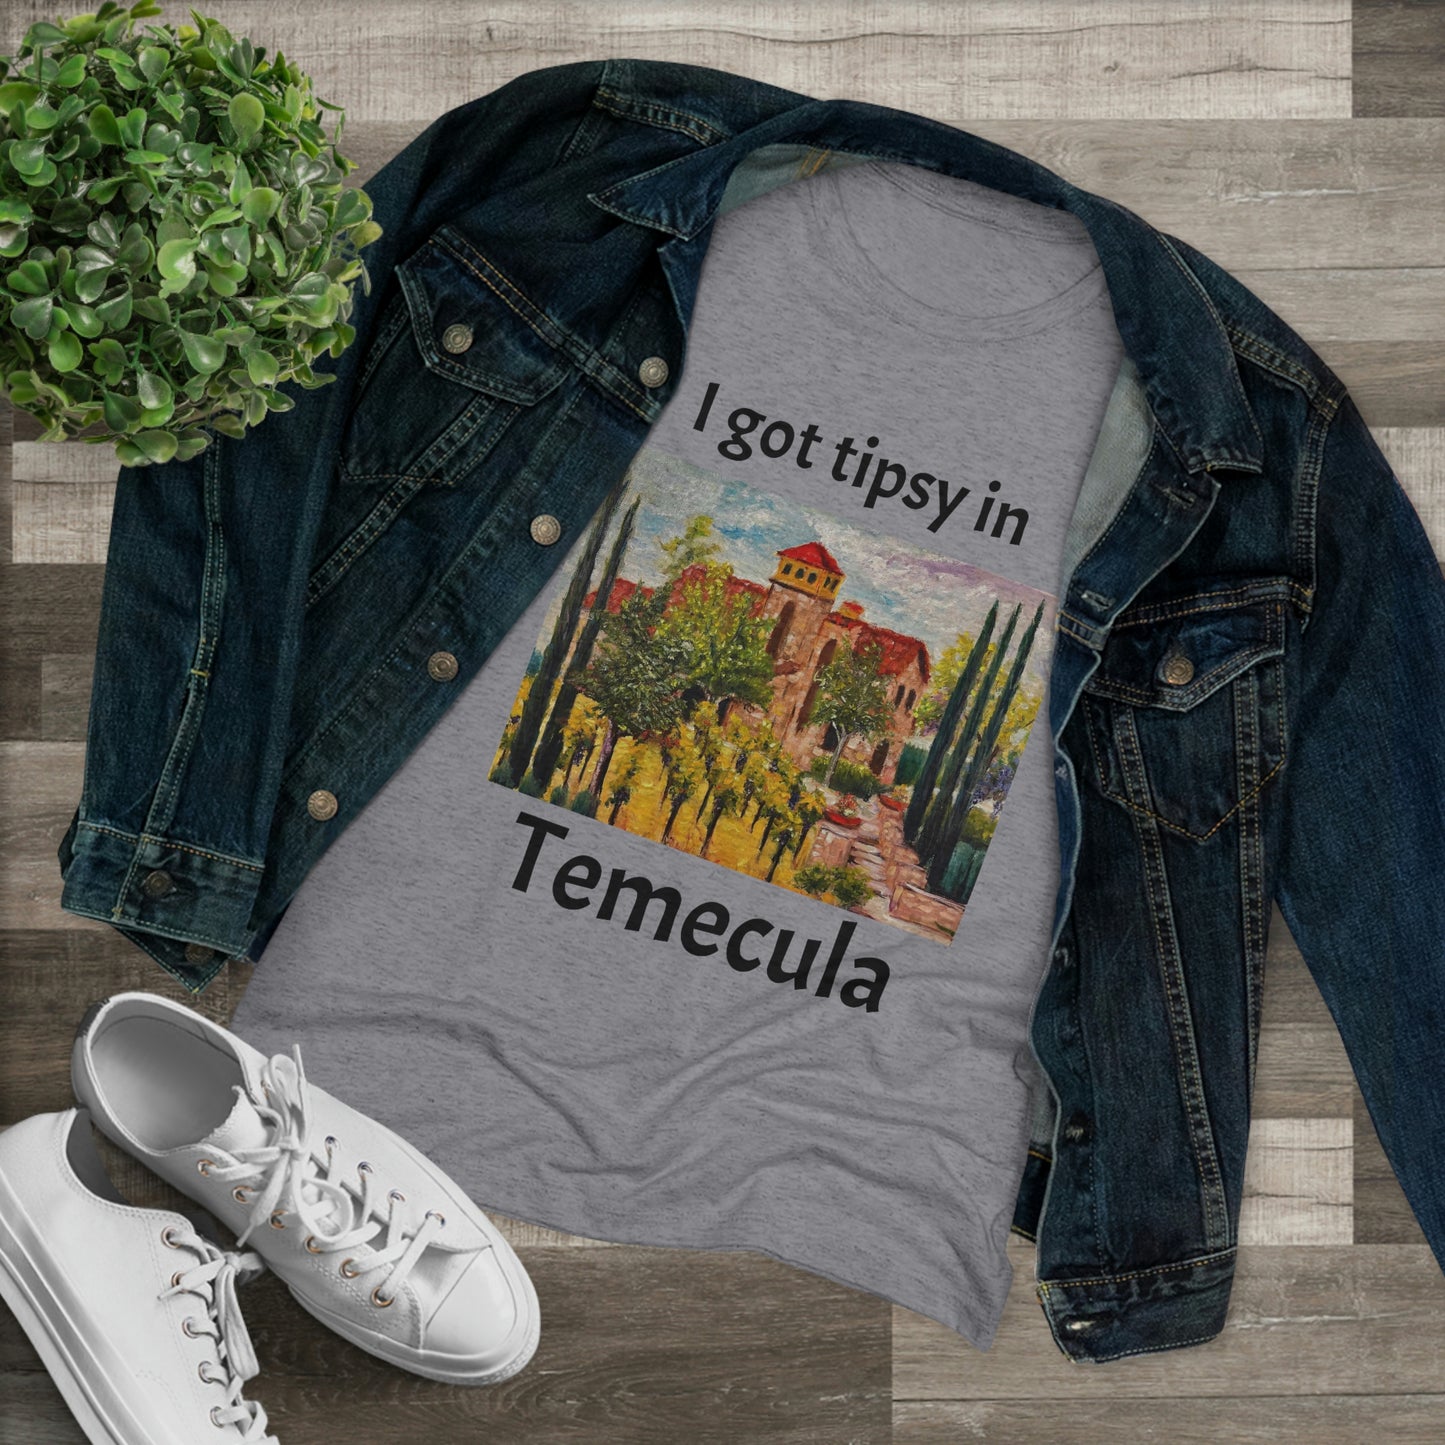 I got tipsy in Temecula Women's fitted Triblend Tee Temecula tee shirt souvenir featuring "Lorimar in Autumn"